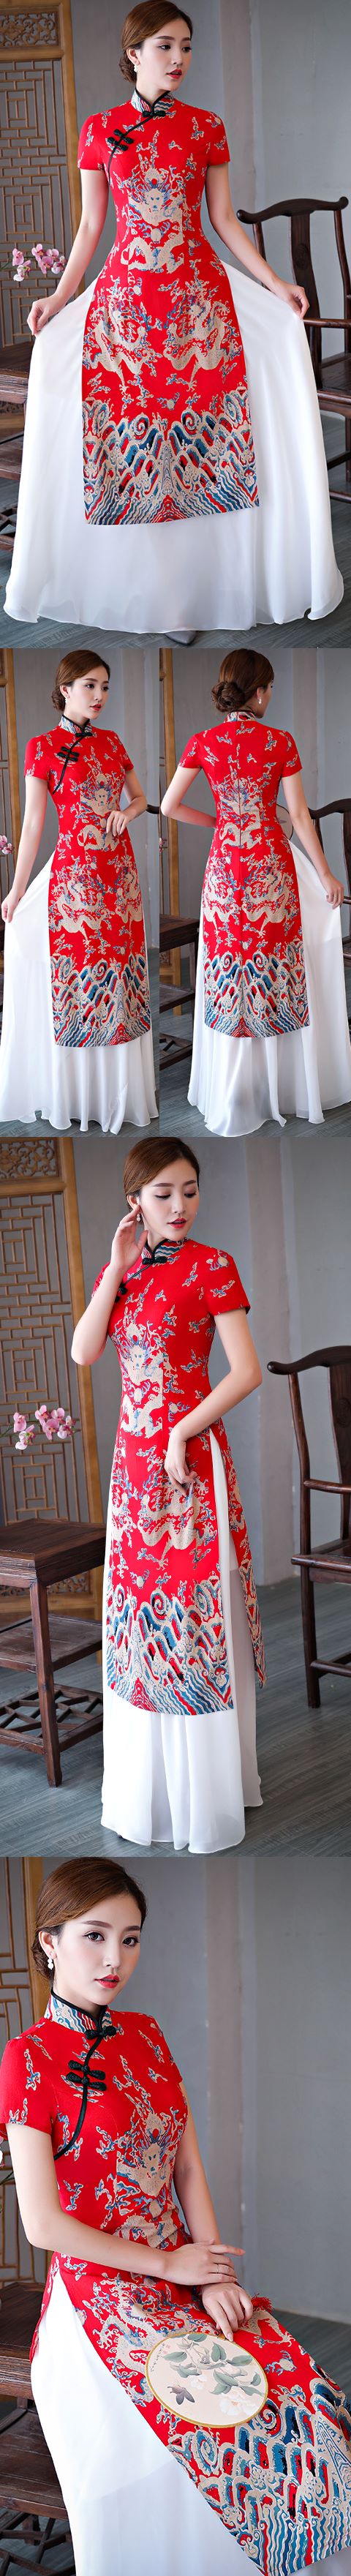 Magnificent Vietnamese National Outfit - Aodai (RM/CM)